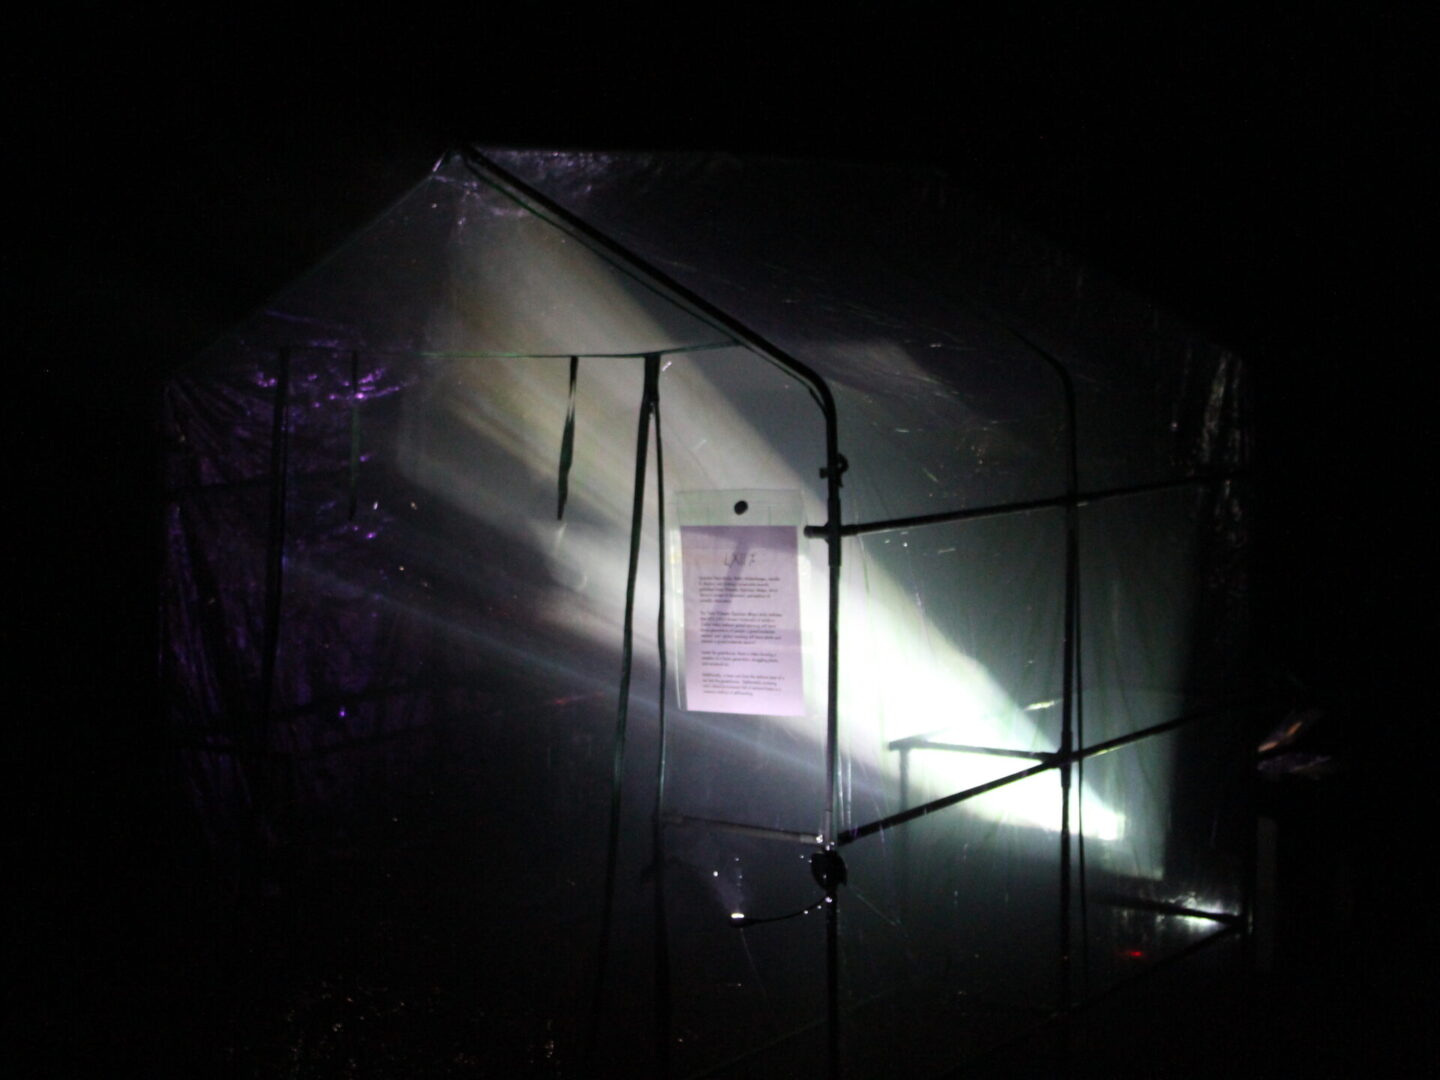 Light coming out from the transparent tent house